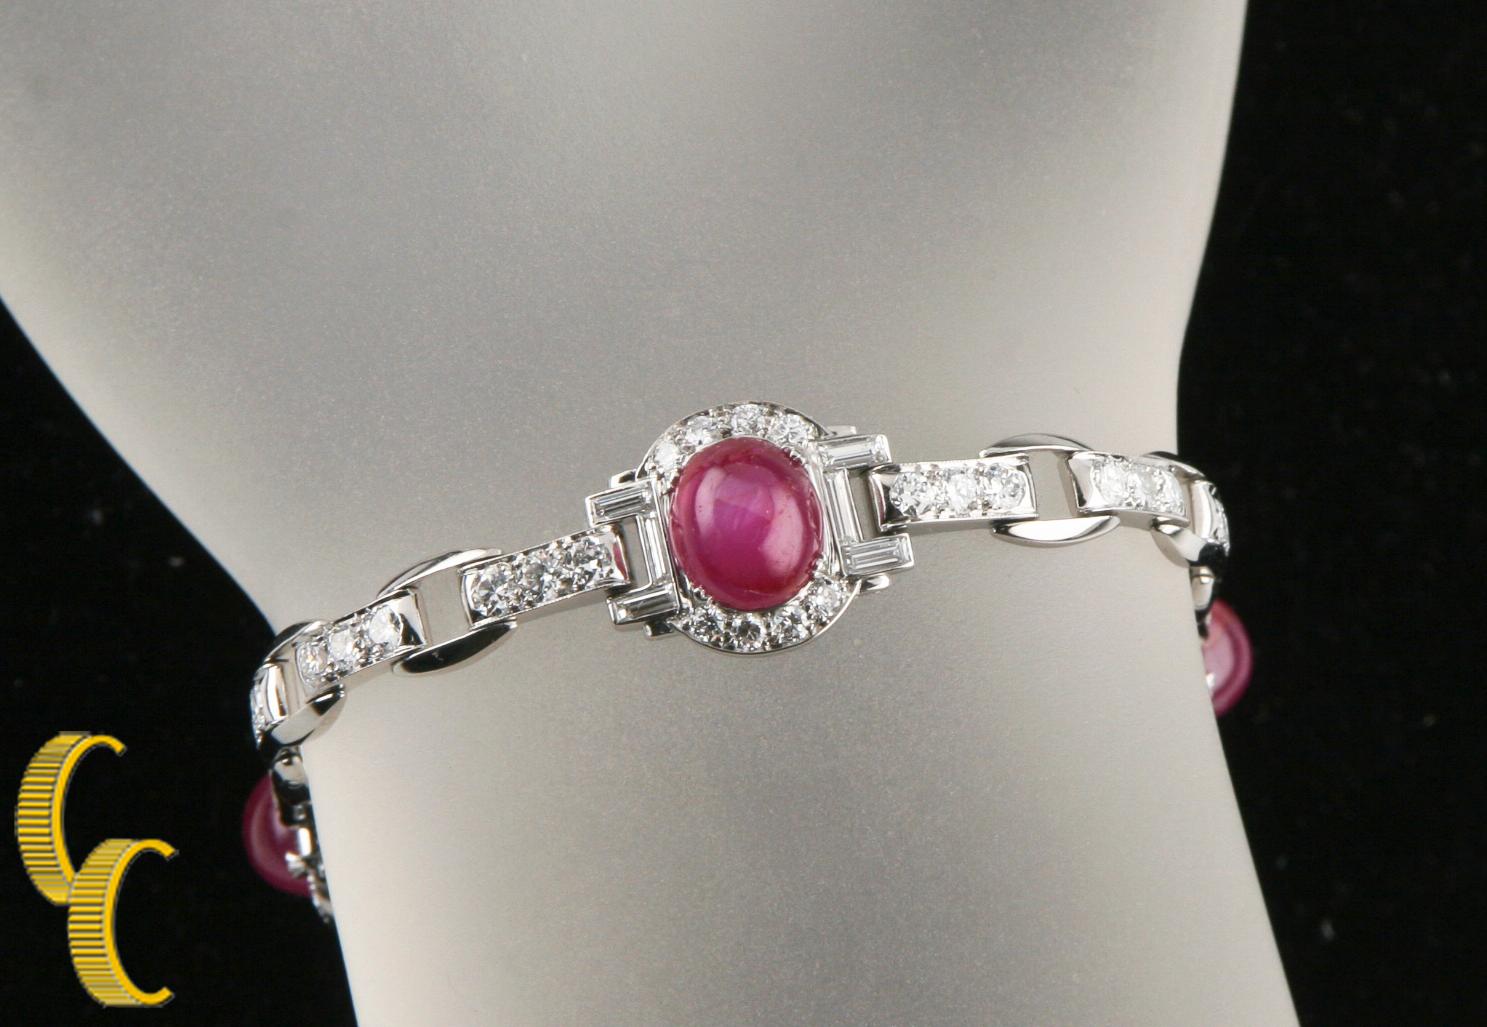 Gorgeous 18k White Gold Link Bracelet
Features Diamond Station Links w/ three Links Featuring Large Star Rubies
Each Diamond Station Link has Three Pave-Set Round Brilliant Diamonds
Each Ruby Station Has One Large Cabochon Star Ruby and Six Pave-Set